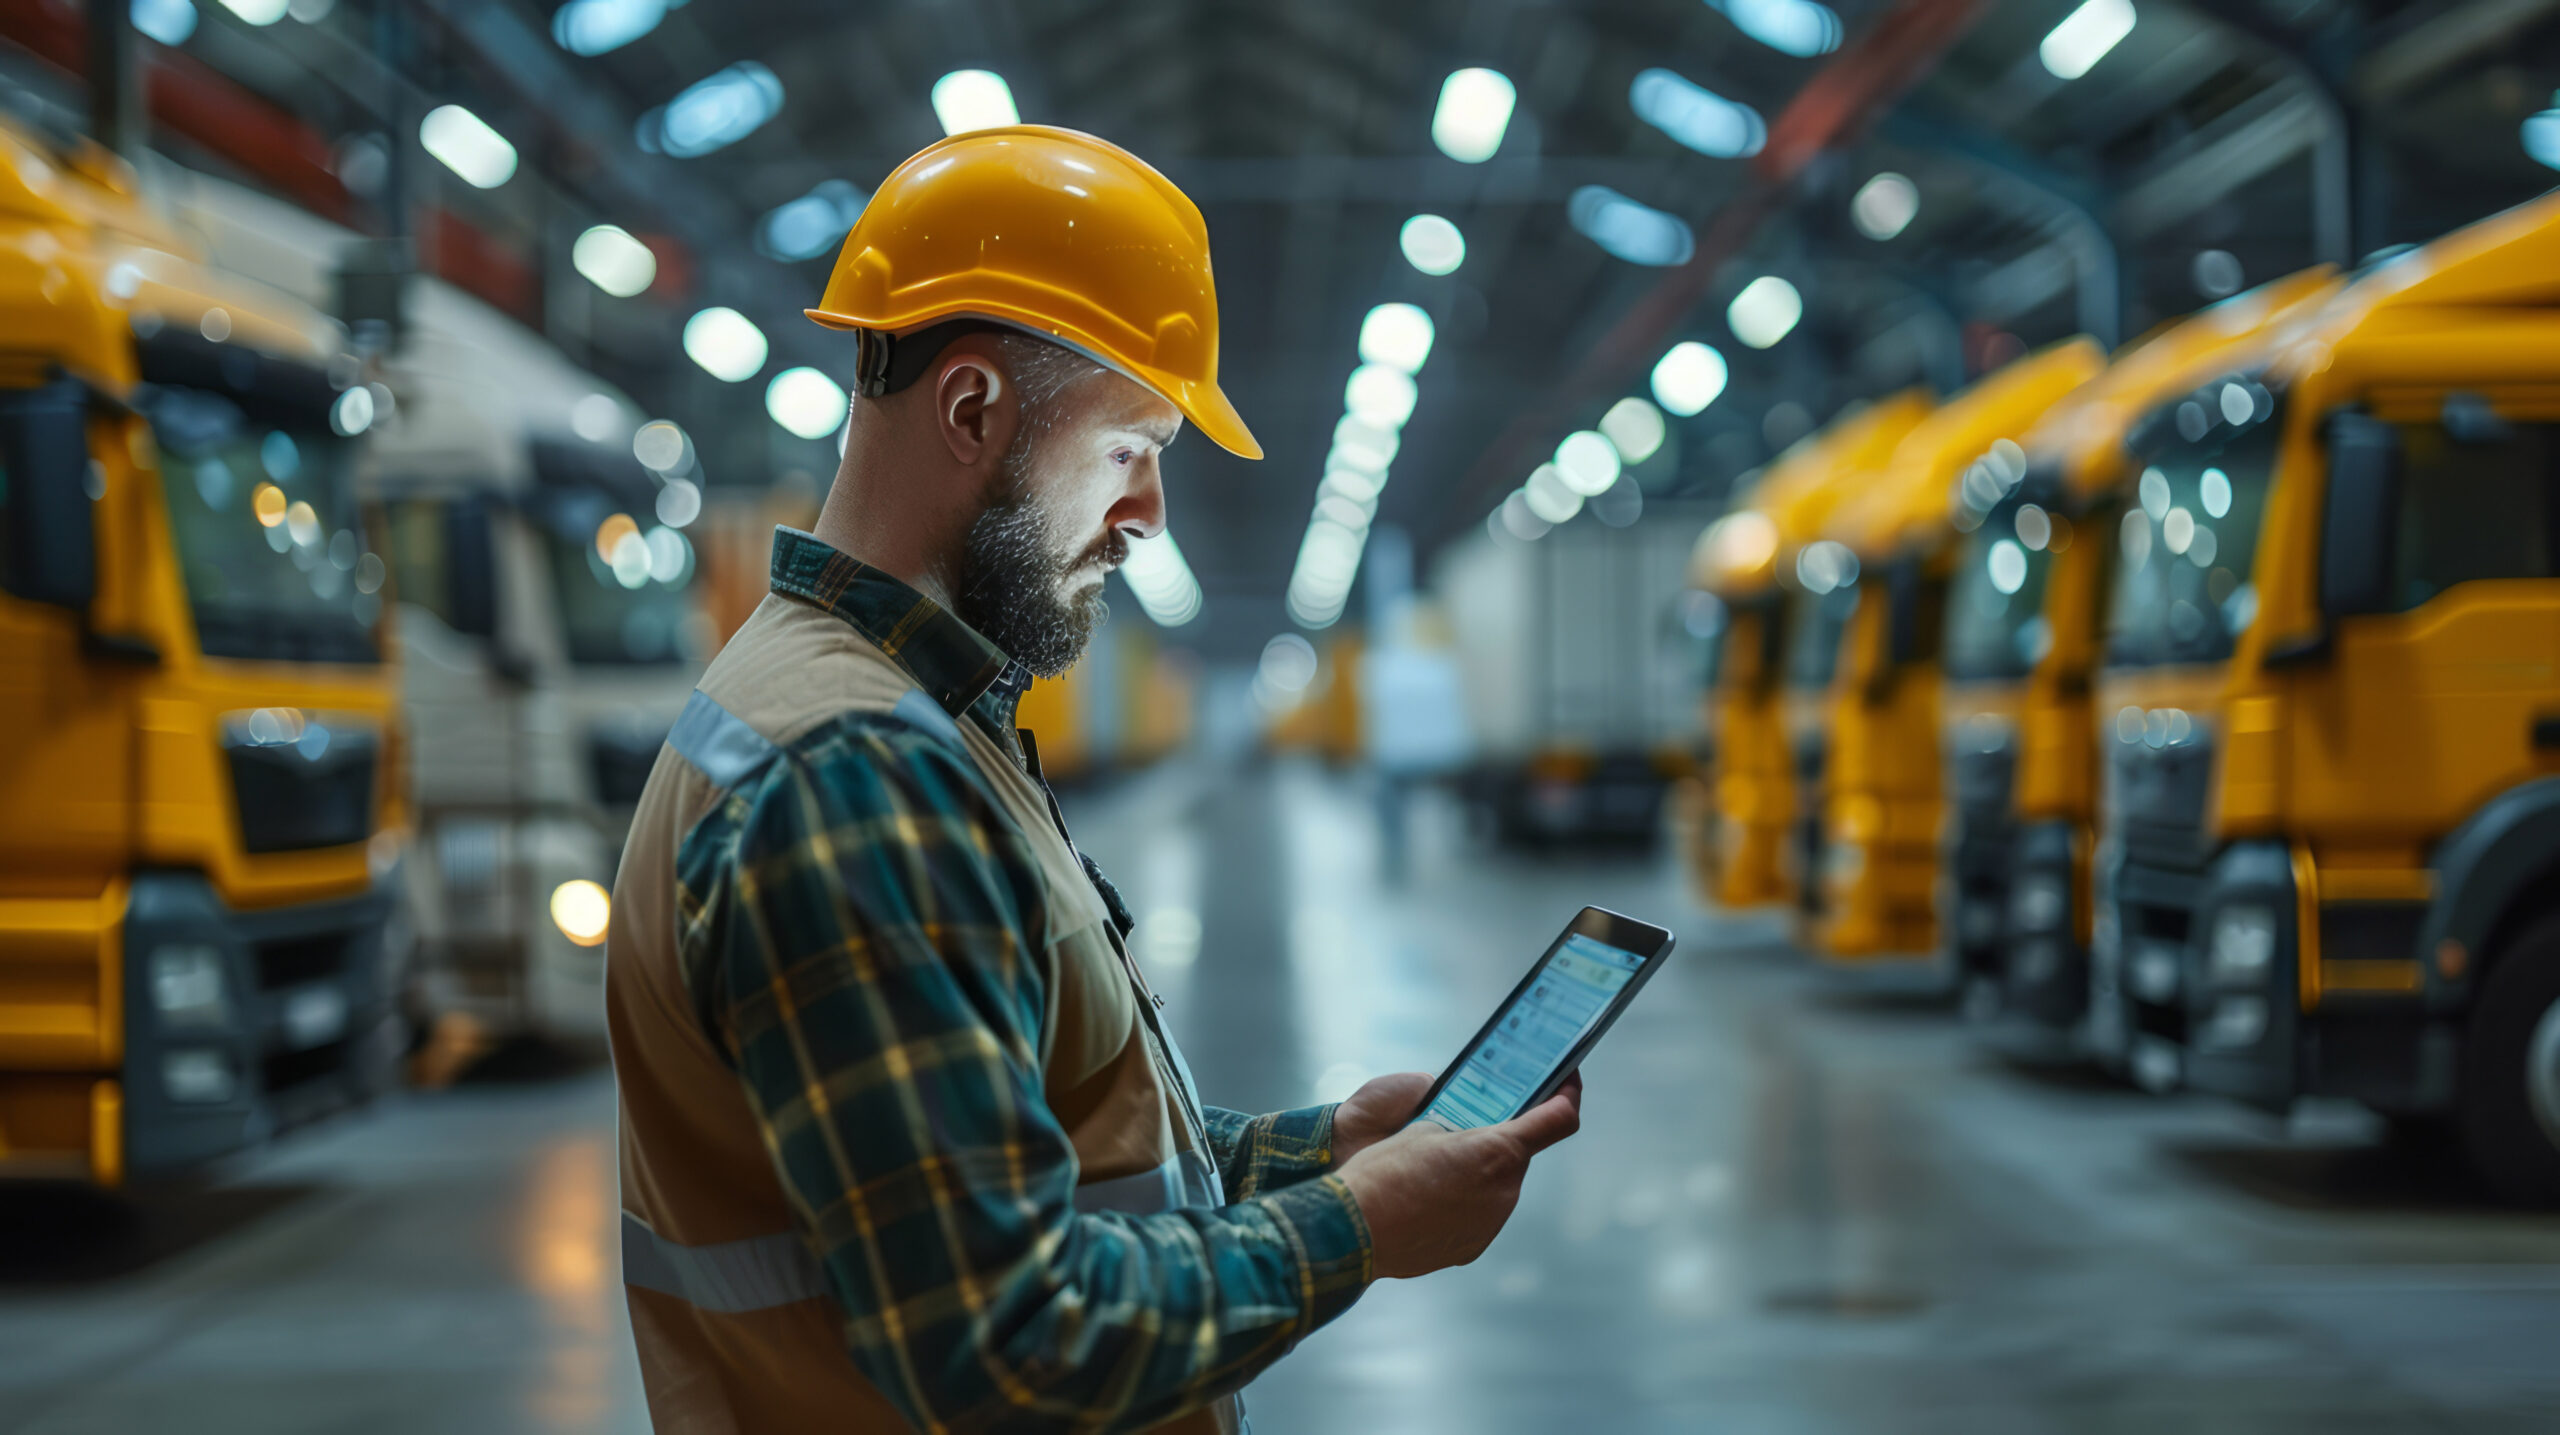 Male logistics worker with hardhat using tablet in industrial warehouse with lined up trucks.